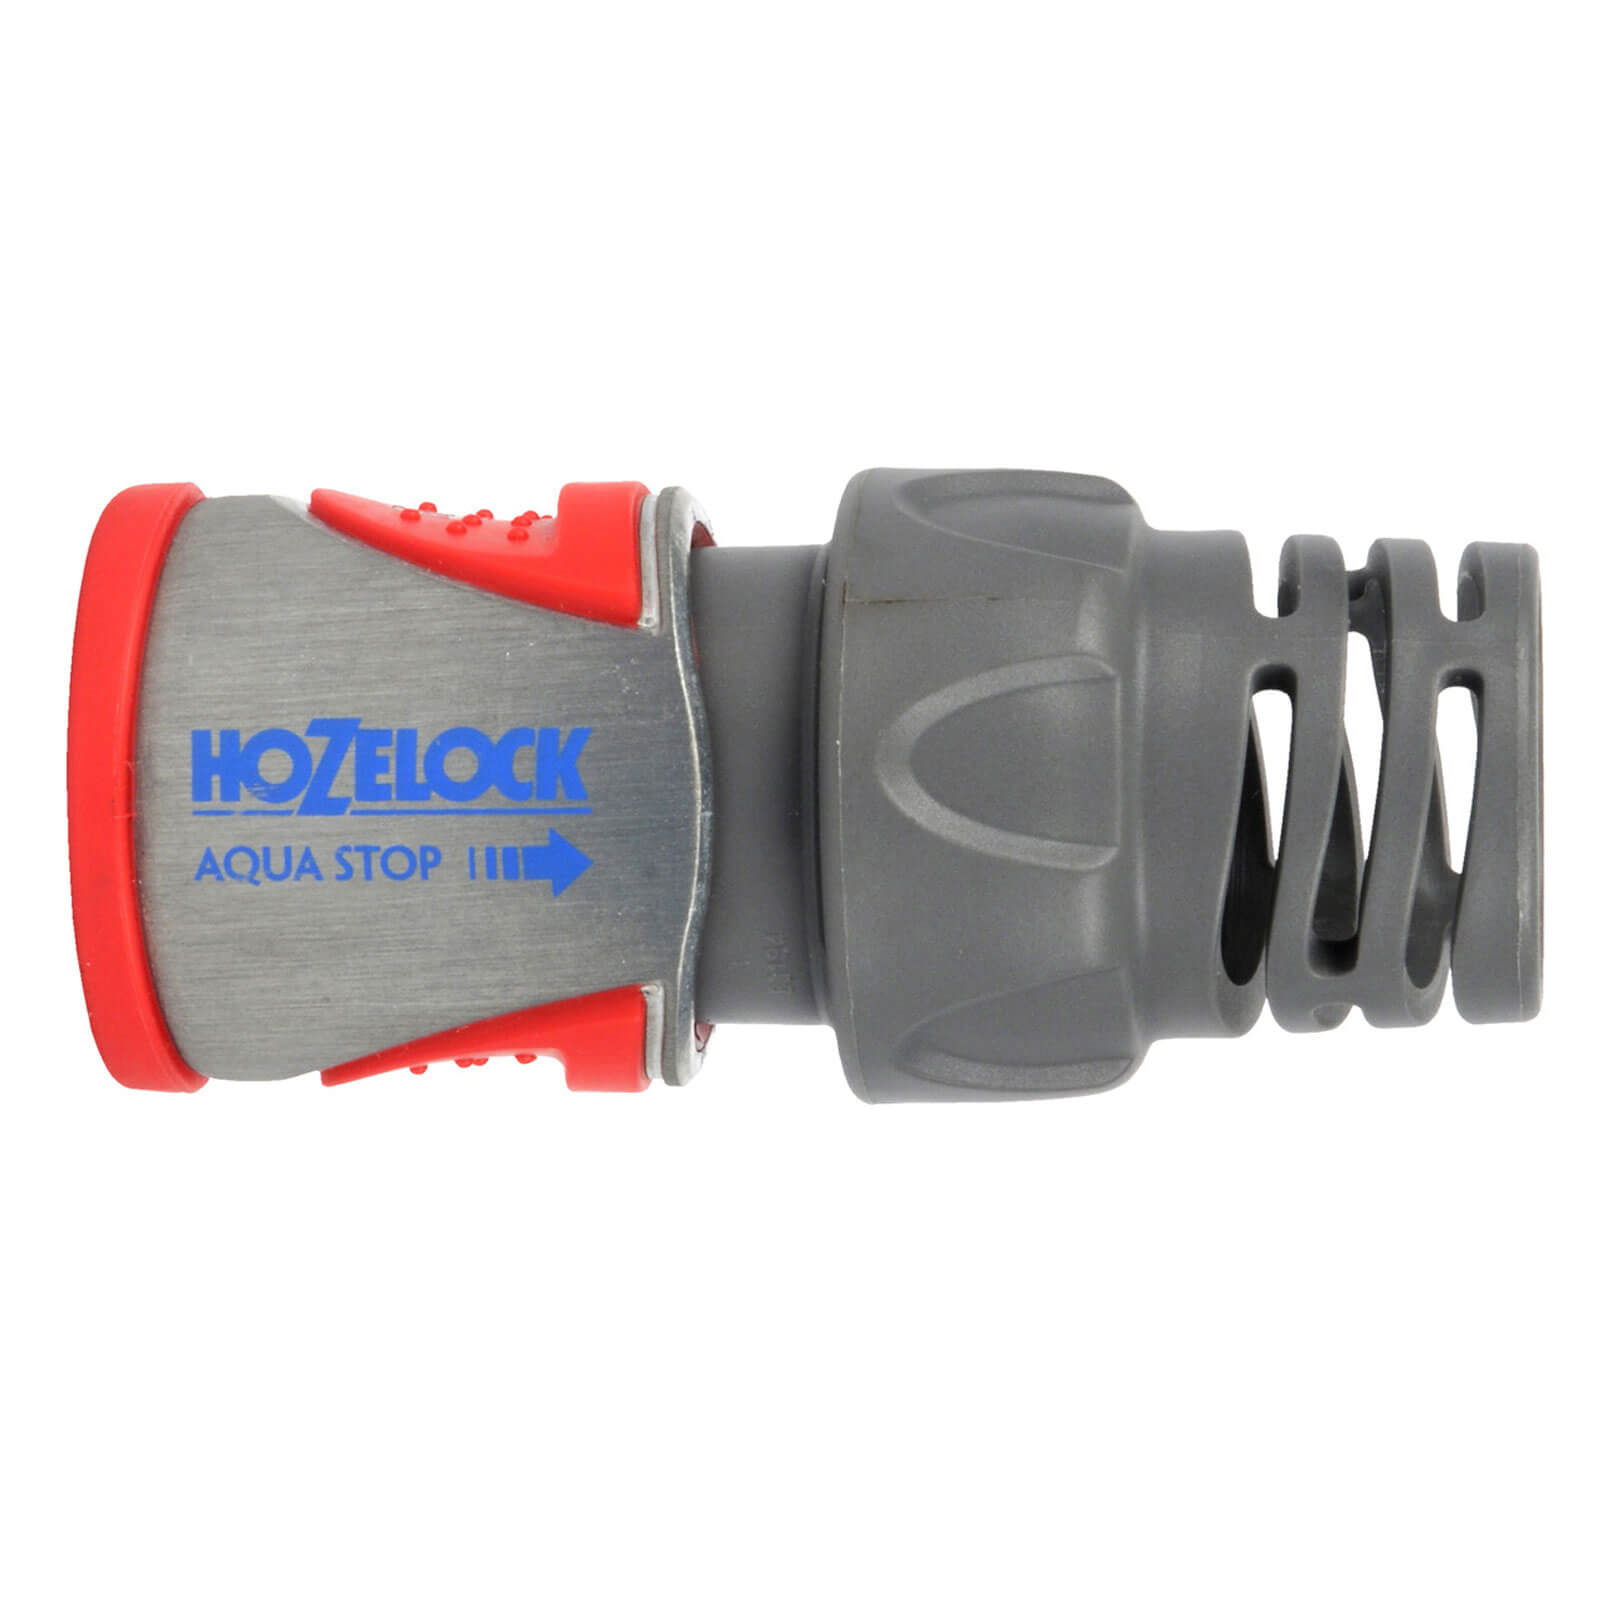 Image of Hozelock Pro Metal AquaStop Hose Pipe Connector 3/4" / 19mm Pack of 1